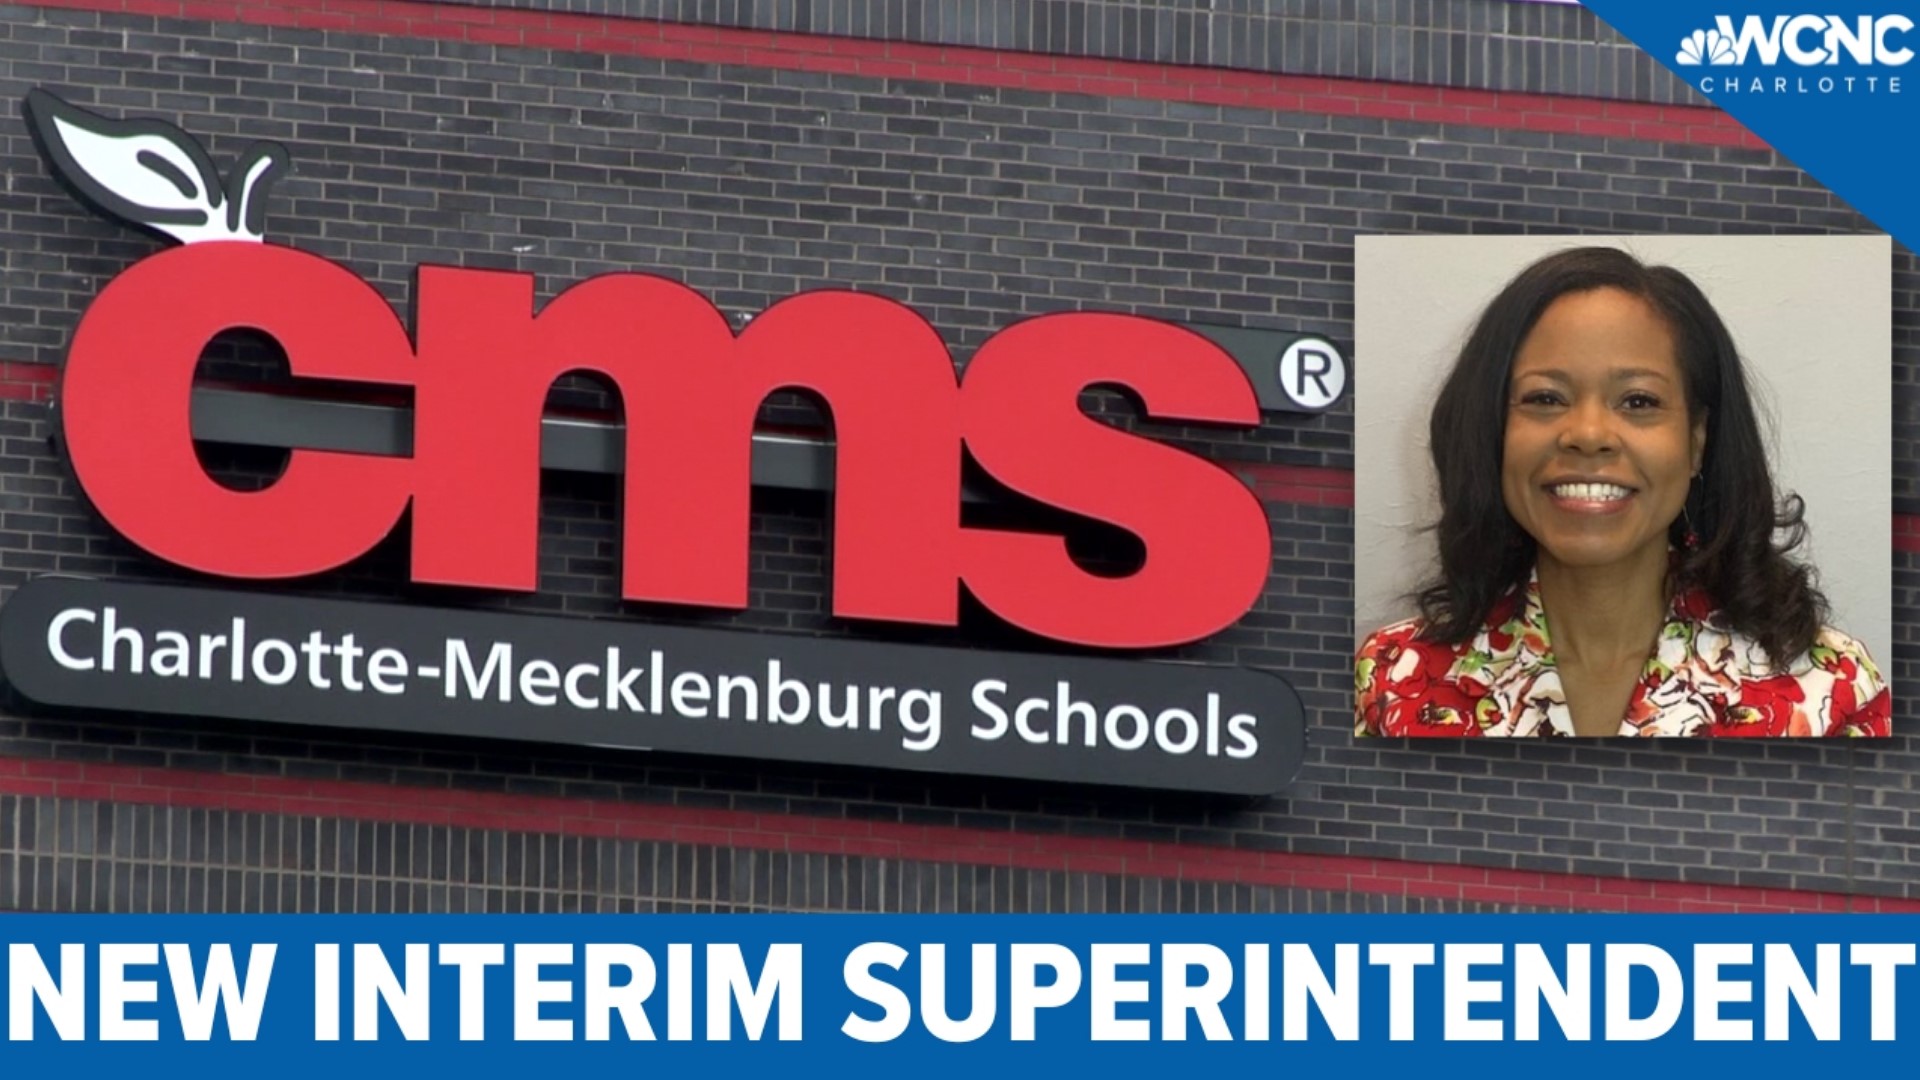 Charlotte-Mecklenburg Schools named Crystal Hill the new interim superintendent for the district on Tuesday after a unanimous vote.